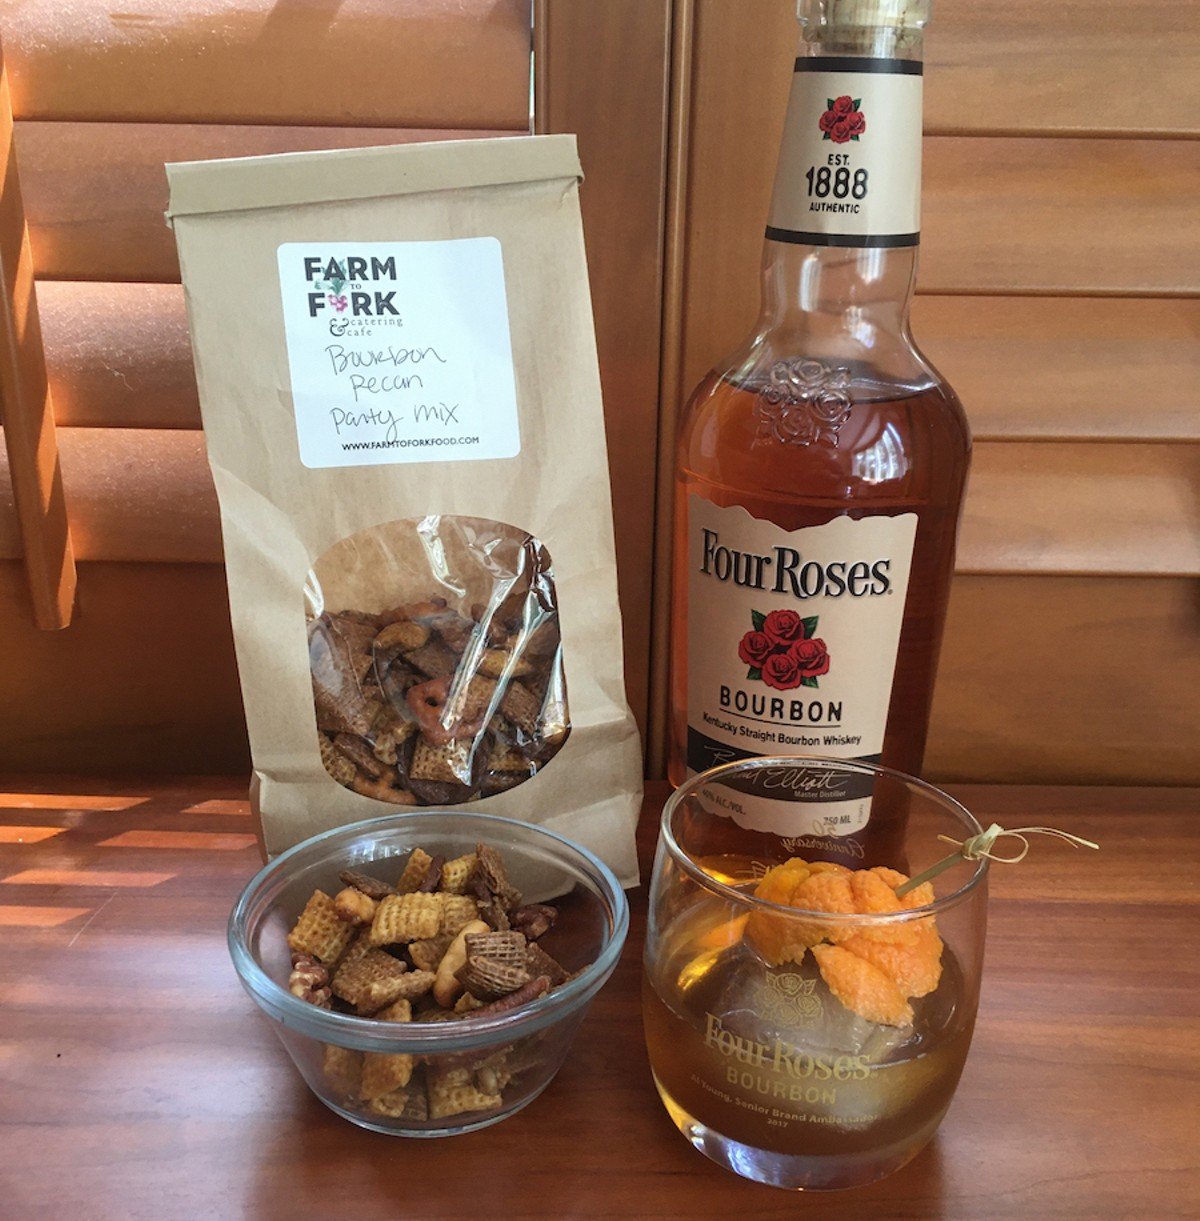 Farm to Fork Catering & Caf&eacute; &#146;s Bourbon Pecan Party Mix is the perfect pairing with Four Roses bourbon because it is itself a &#147;party mix&#148; of mashbills and yeast strain.  |  Photo by Susan Reigler.